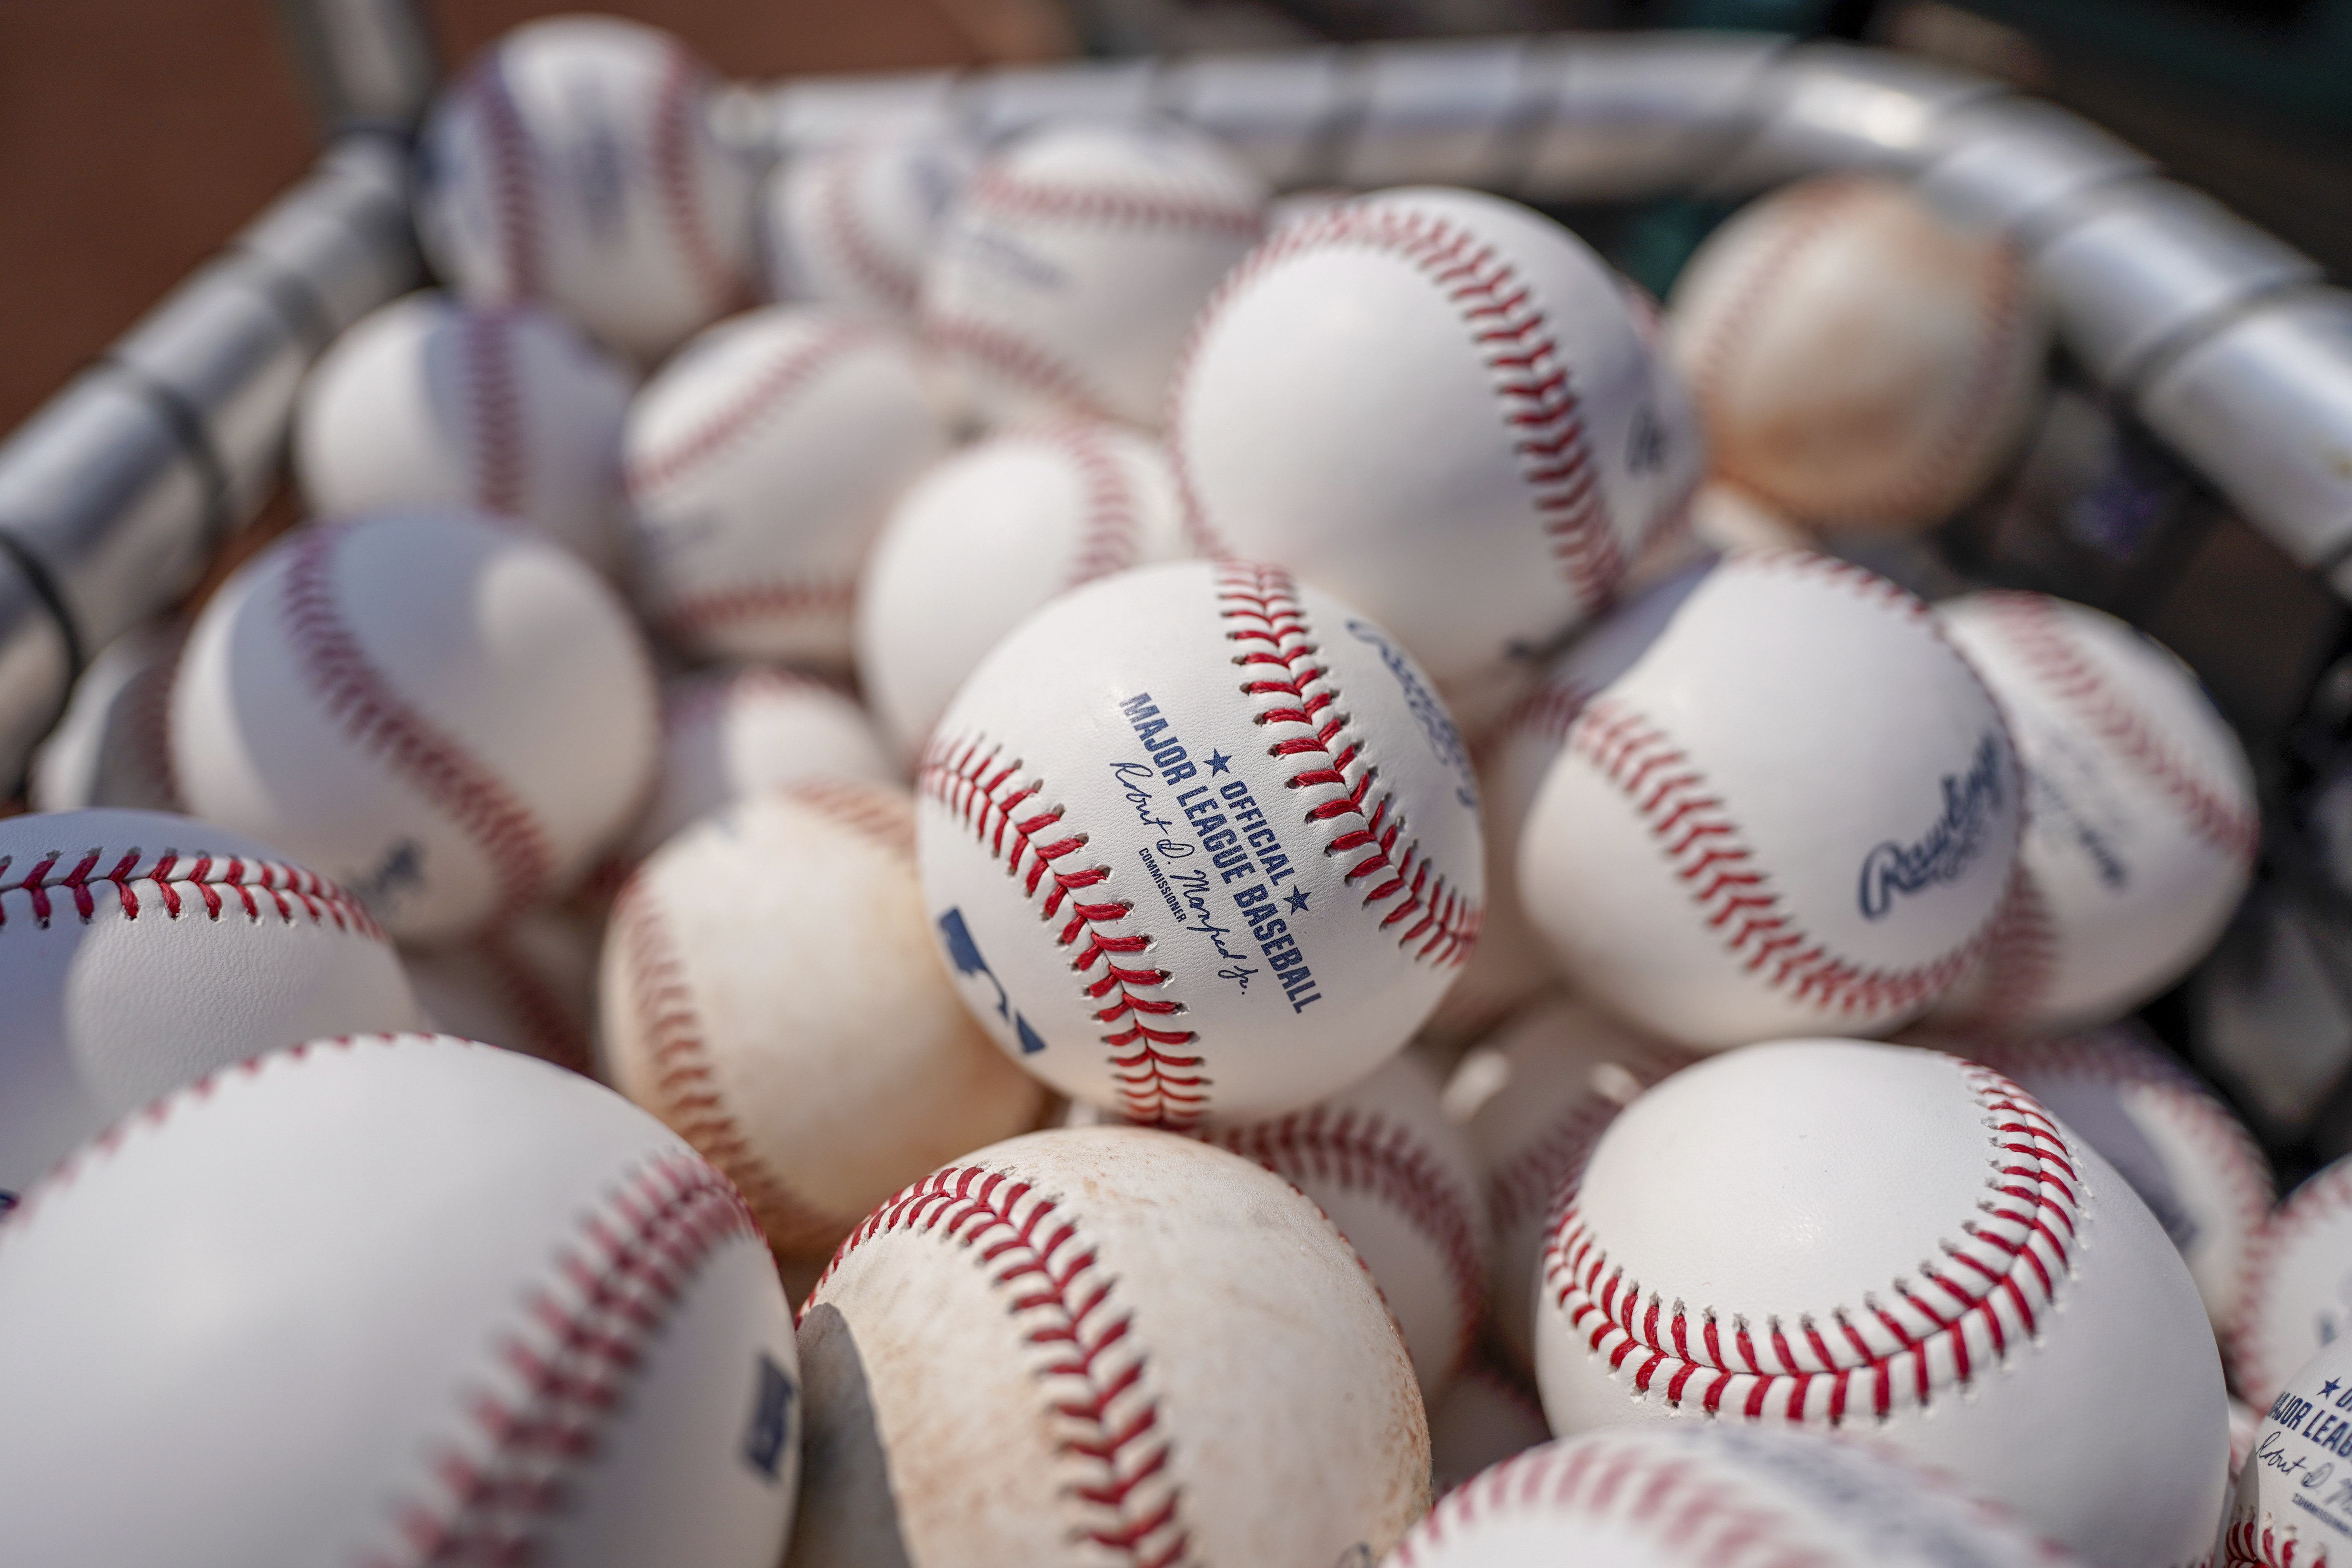 MLB standardizes how baseballs are prepped to be put in play